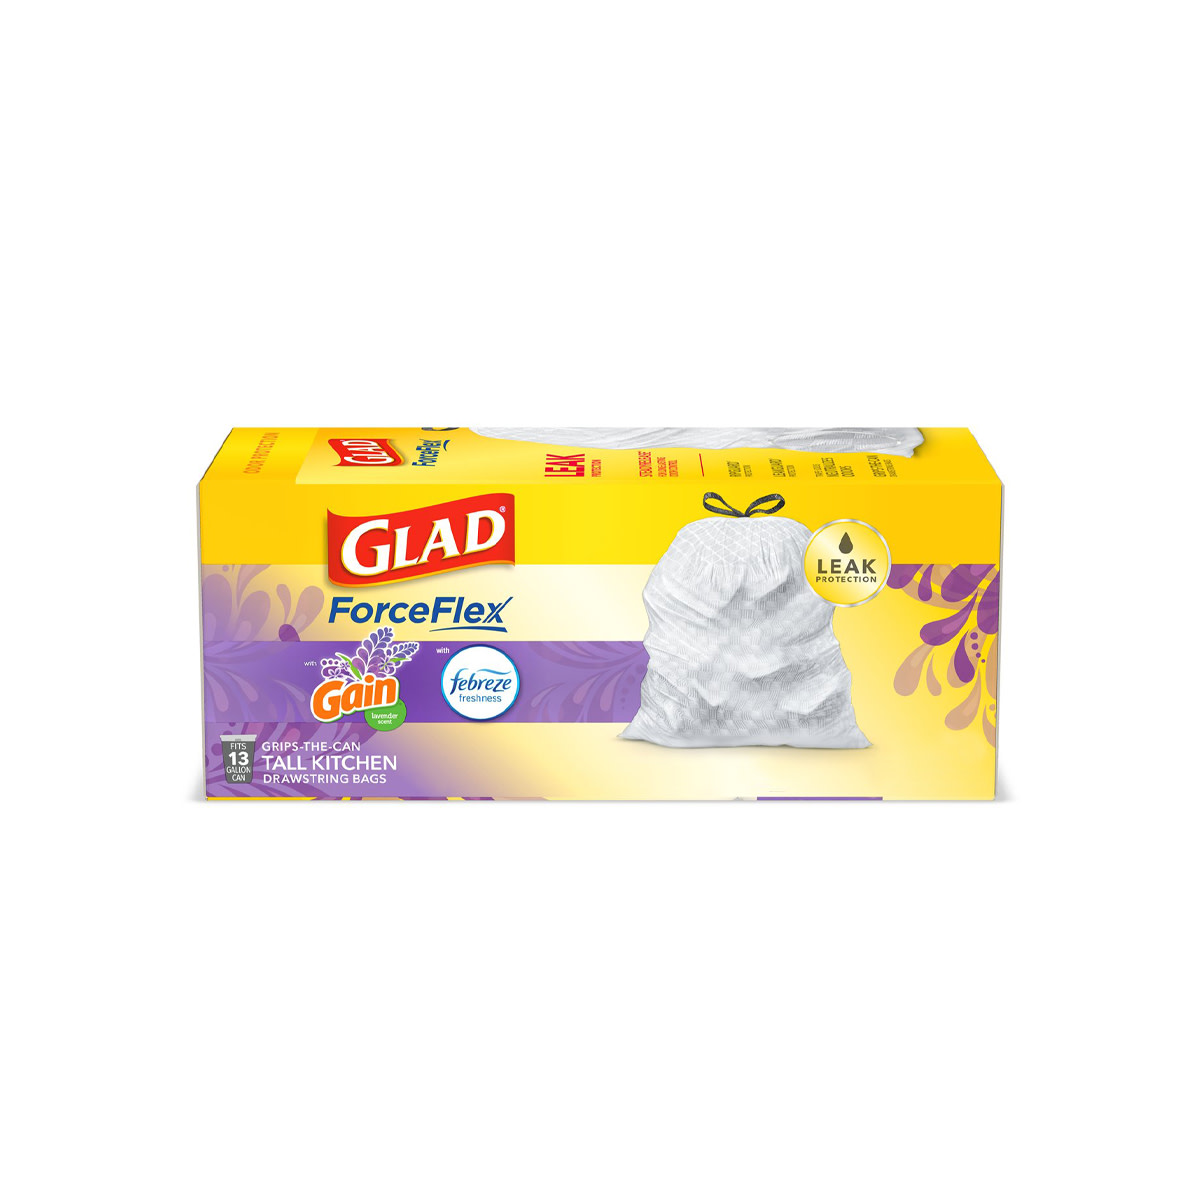 Pack of Glad® Trash Bags with the scent of Gain Lavender